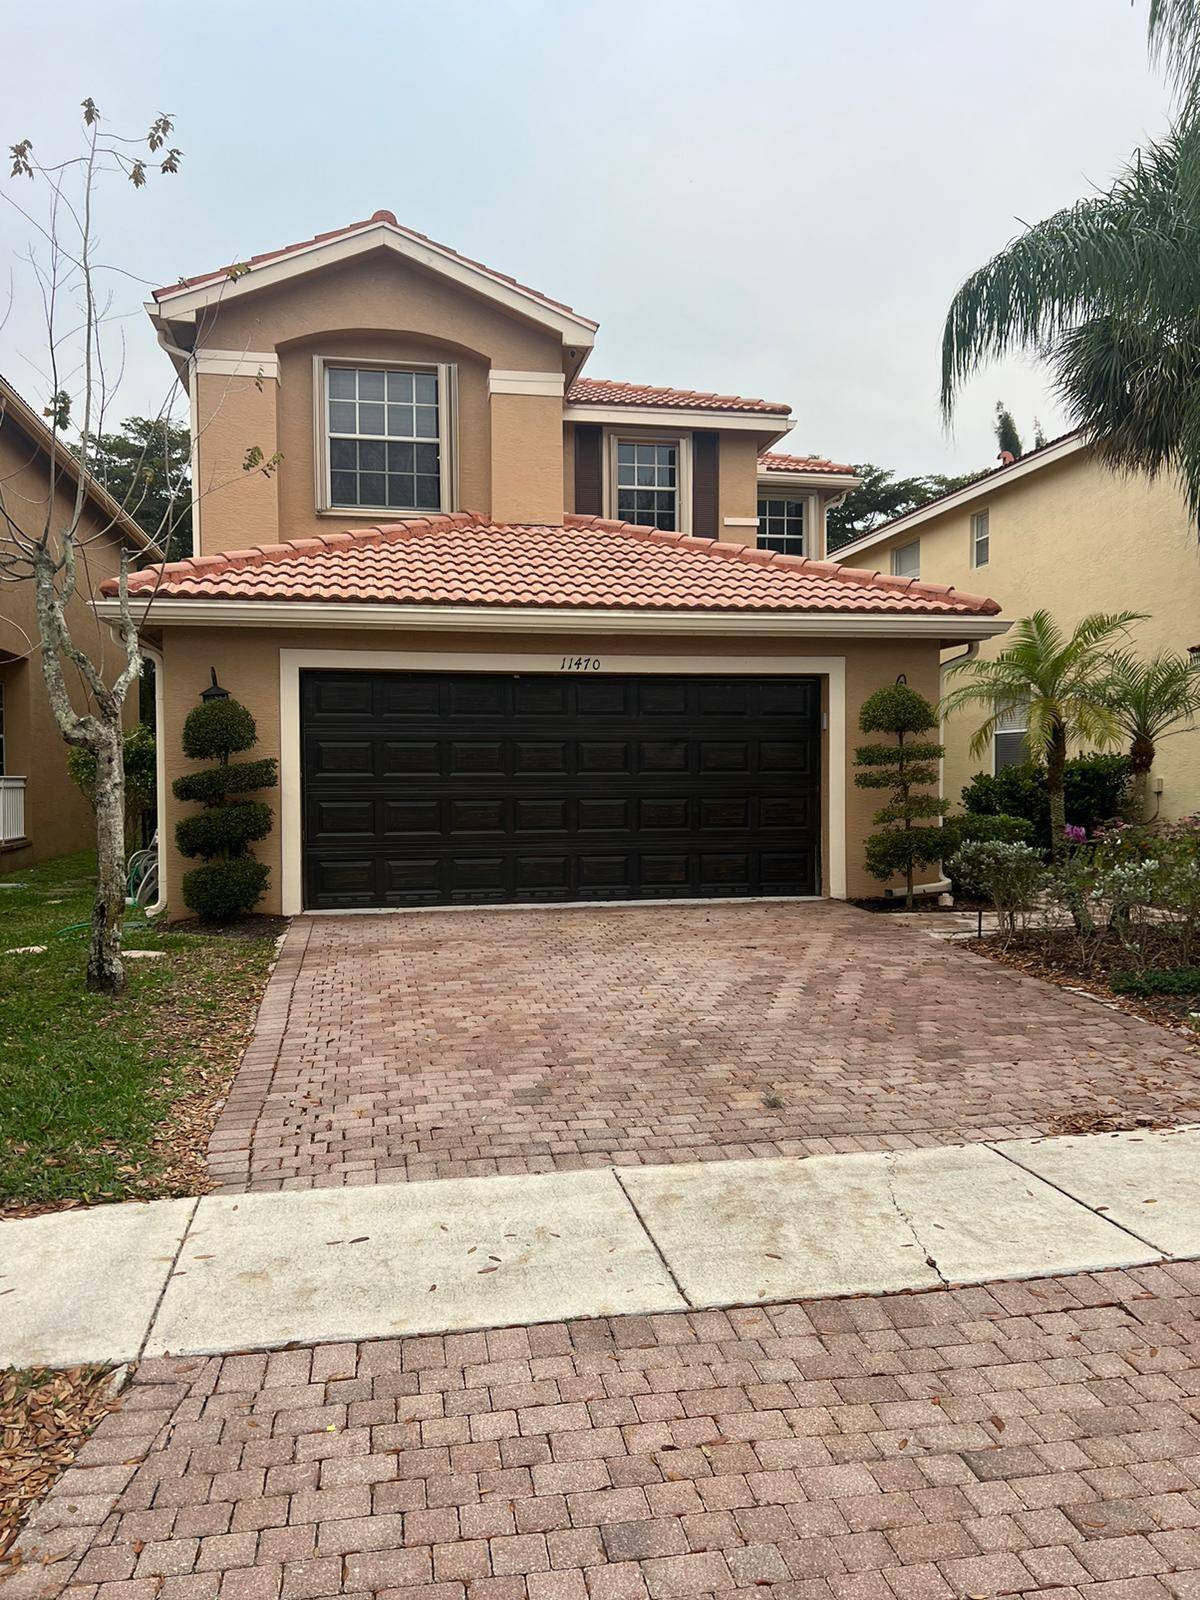 Welcome to this stunning 5 bed, 3 bath, 2 cars garage home sweet home, located in the beautiful and desired community of Nautica Lakes in the heart of Royal Palm ...